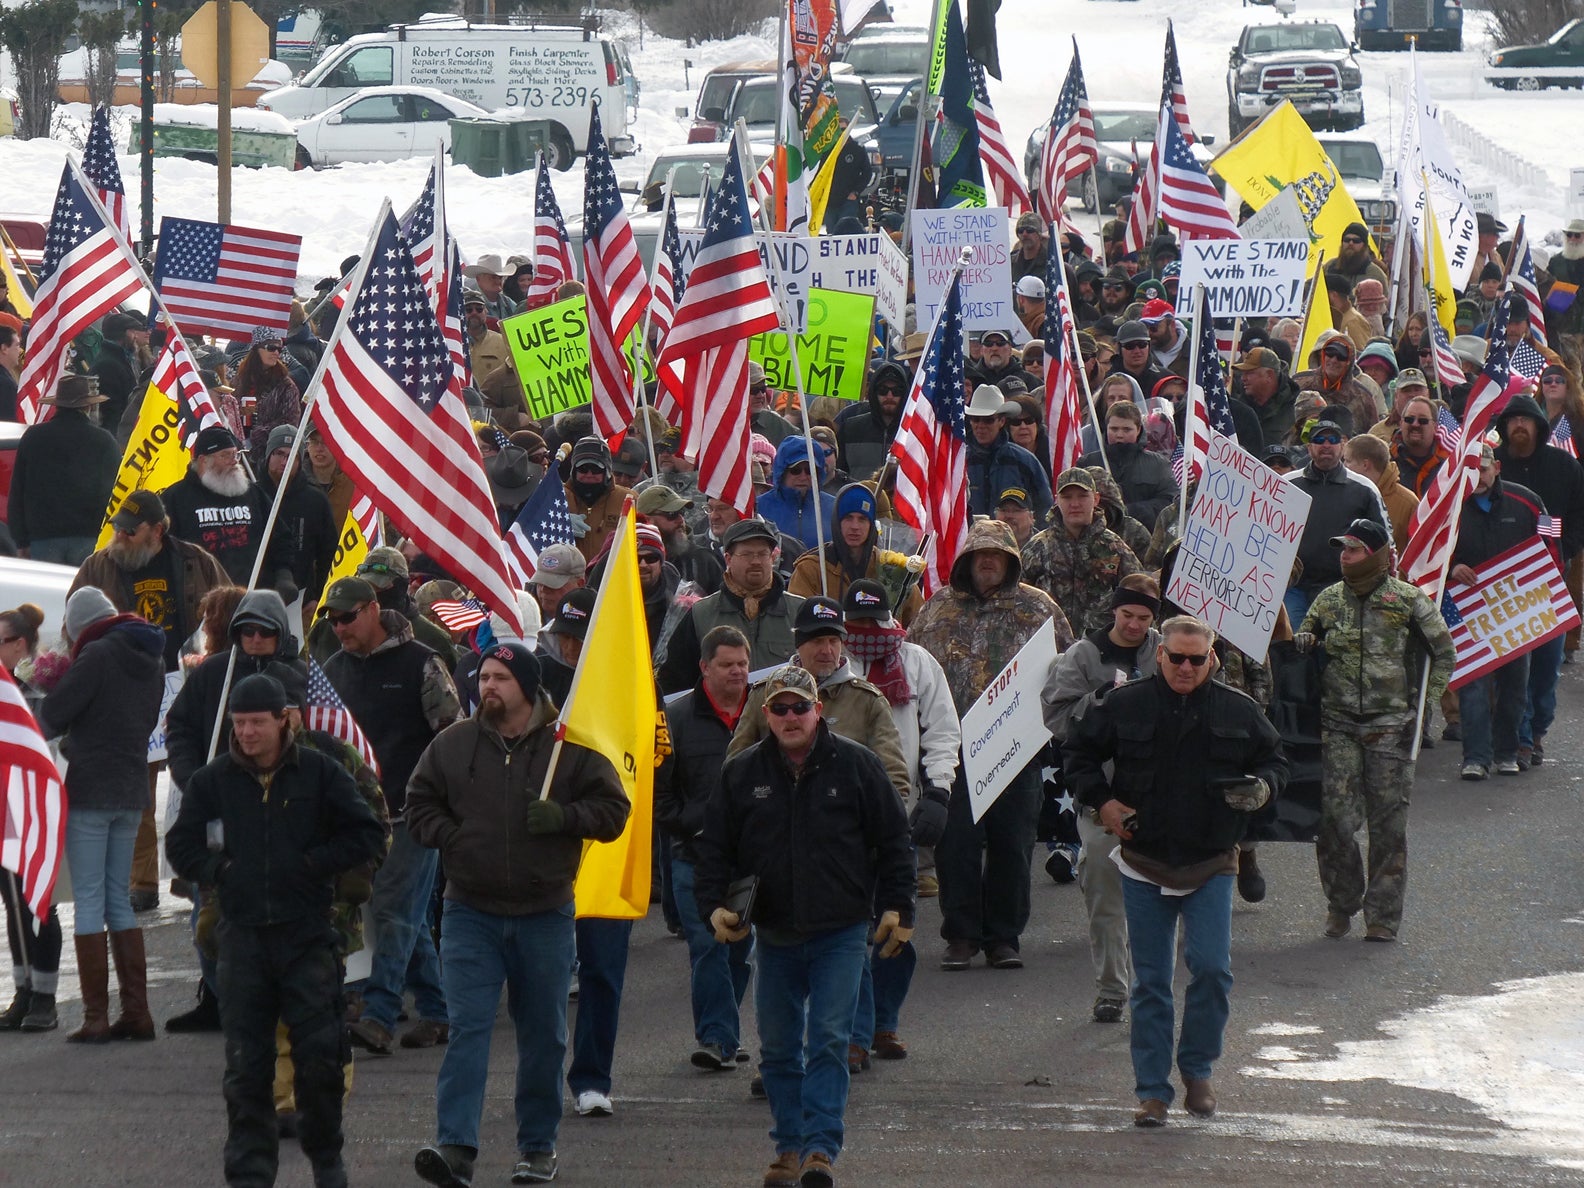 Protesters march on Court Avenue in support of an Oregon ranching family facing jail time for arson in Burns, Oregon, January 2, 2016